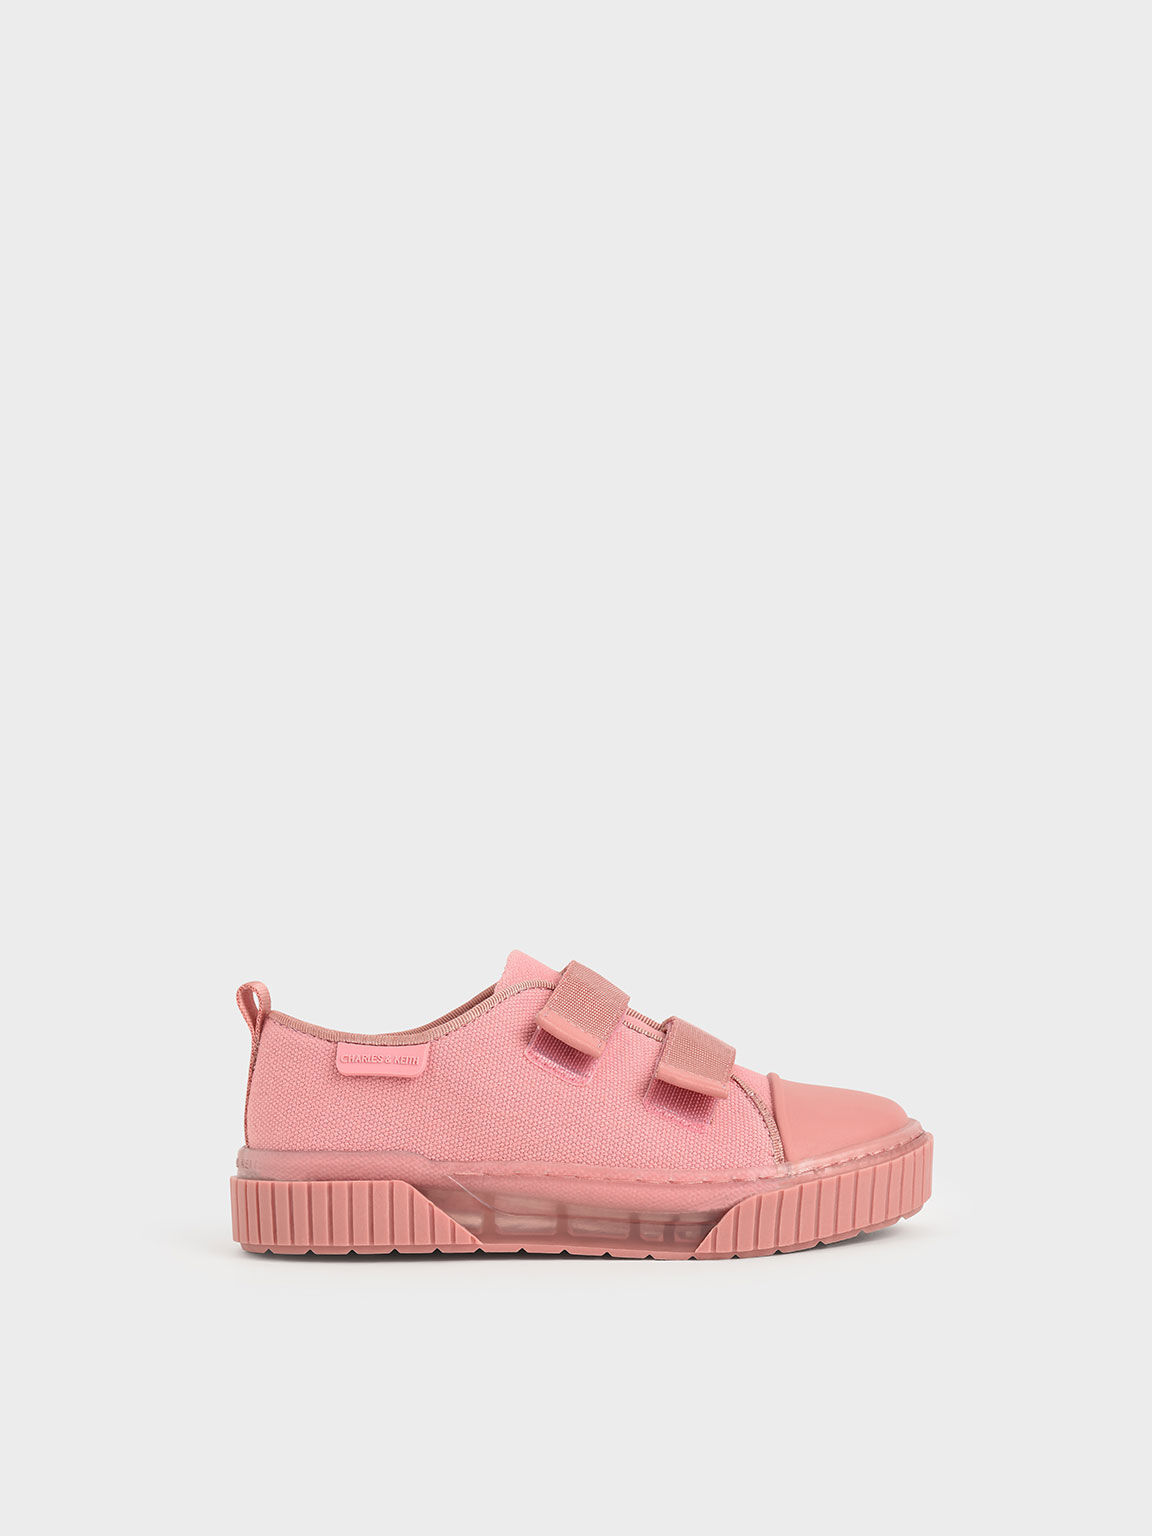 Purpose Collection 2021: Girls' Organic Cotton Sneakers, Pink, hi-res